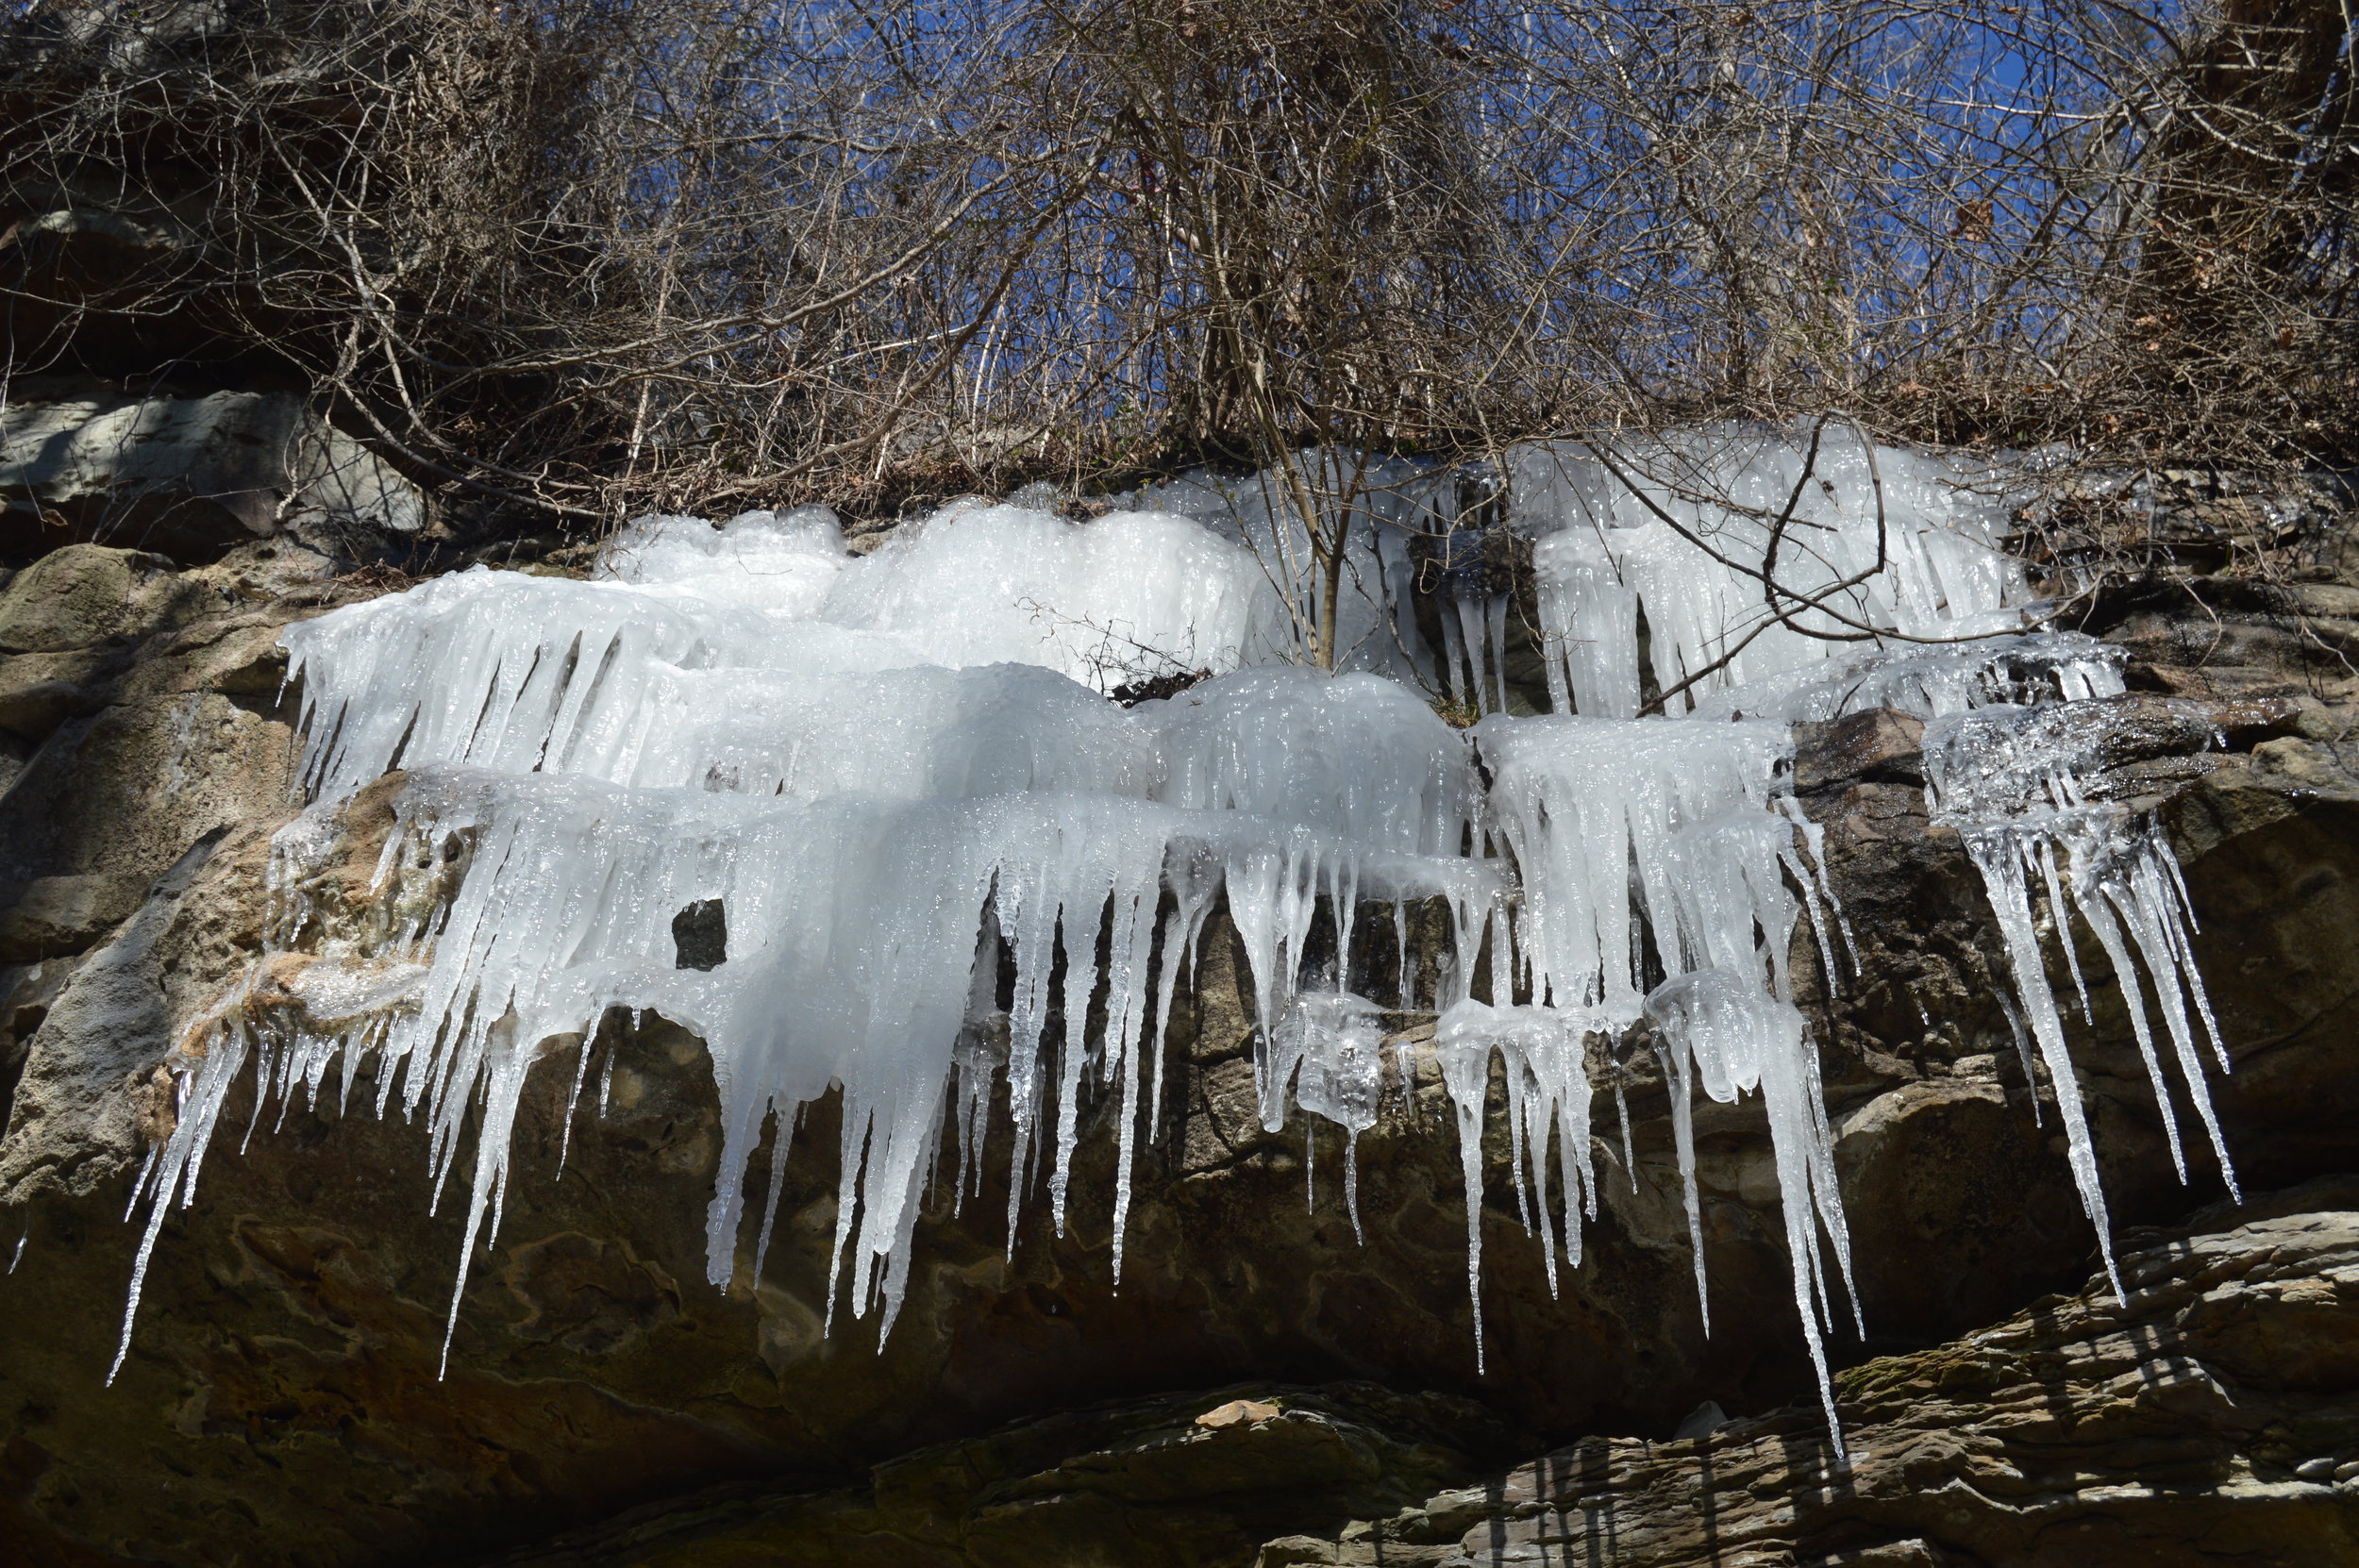  The rock ledges on the trail down to the base of Ozone Falls covered in a wide array of icicles. 